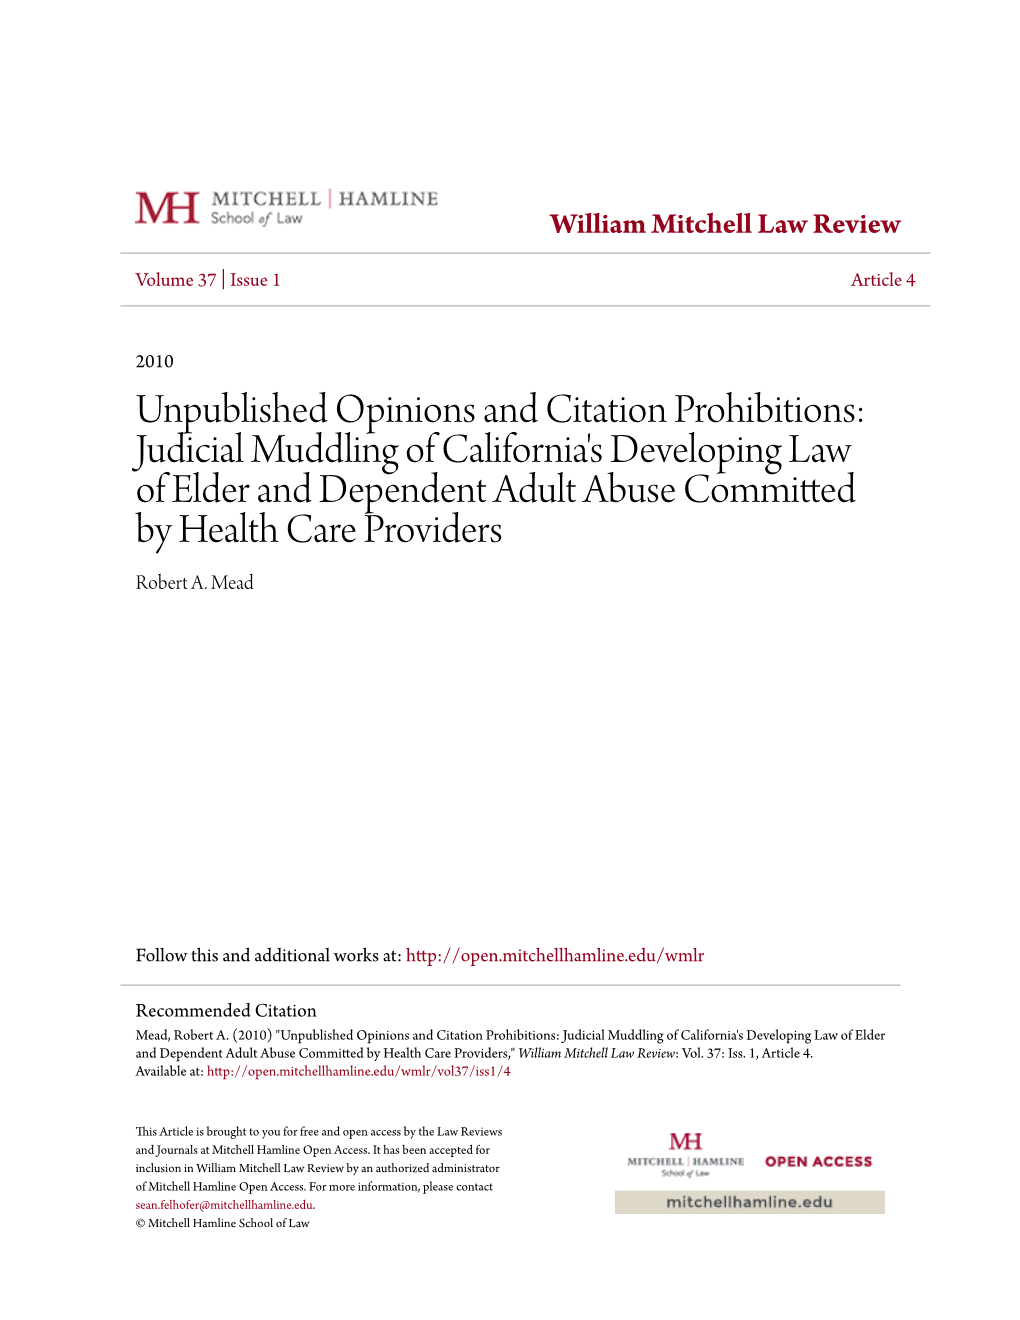 Unpublished Opinions and Citation Prohibitions: Judicial Muddling Of